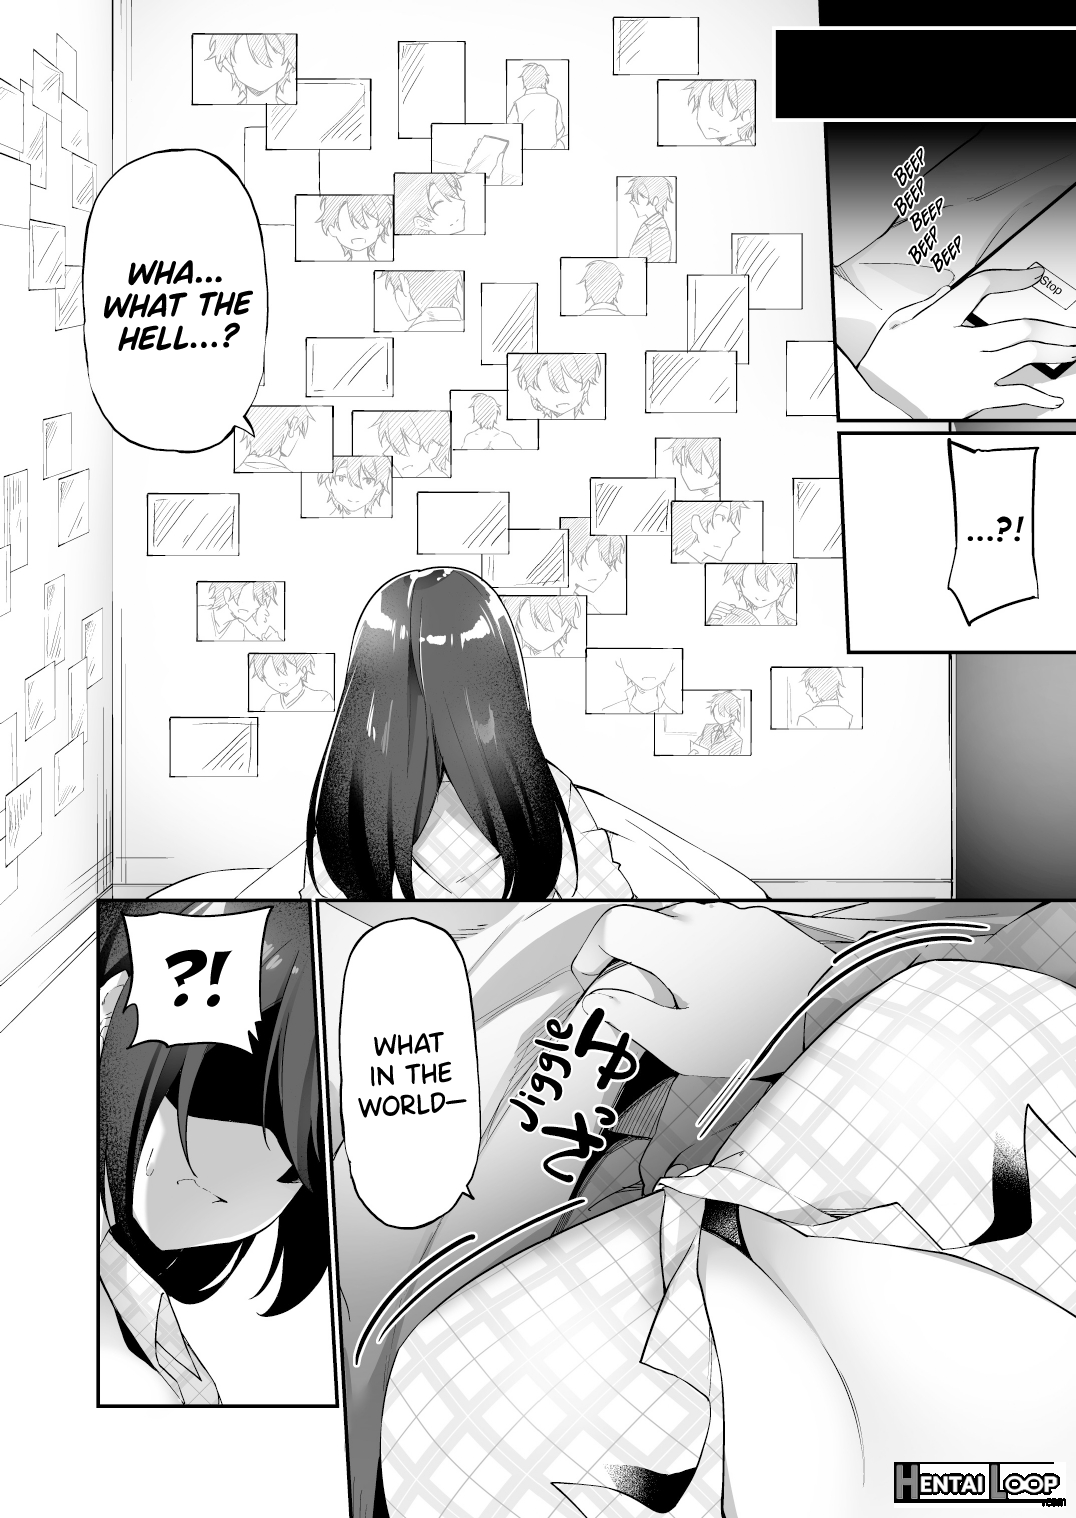 My Voluptuous Yandere Kouhai Who Gets Turned On Just By Hearing My Voice Switched Bodies With Me! page 3